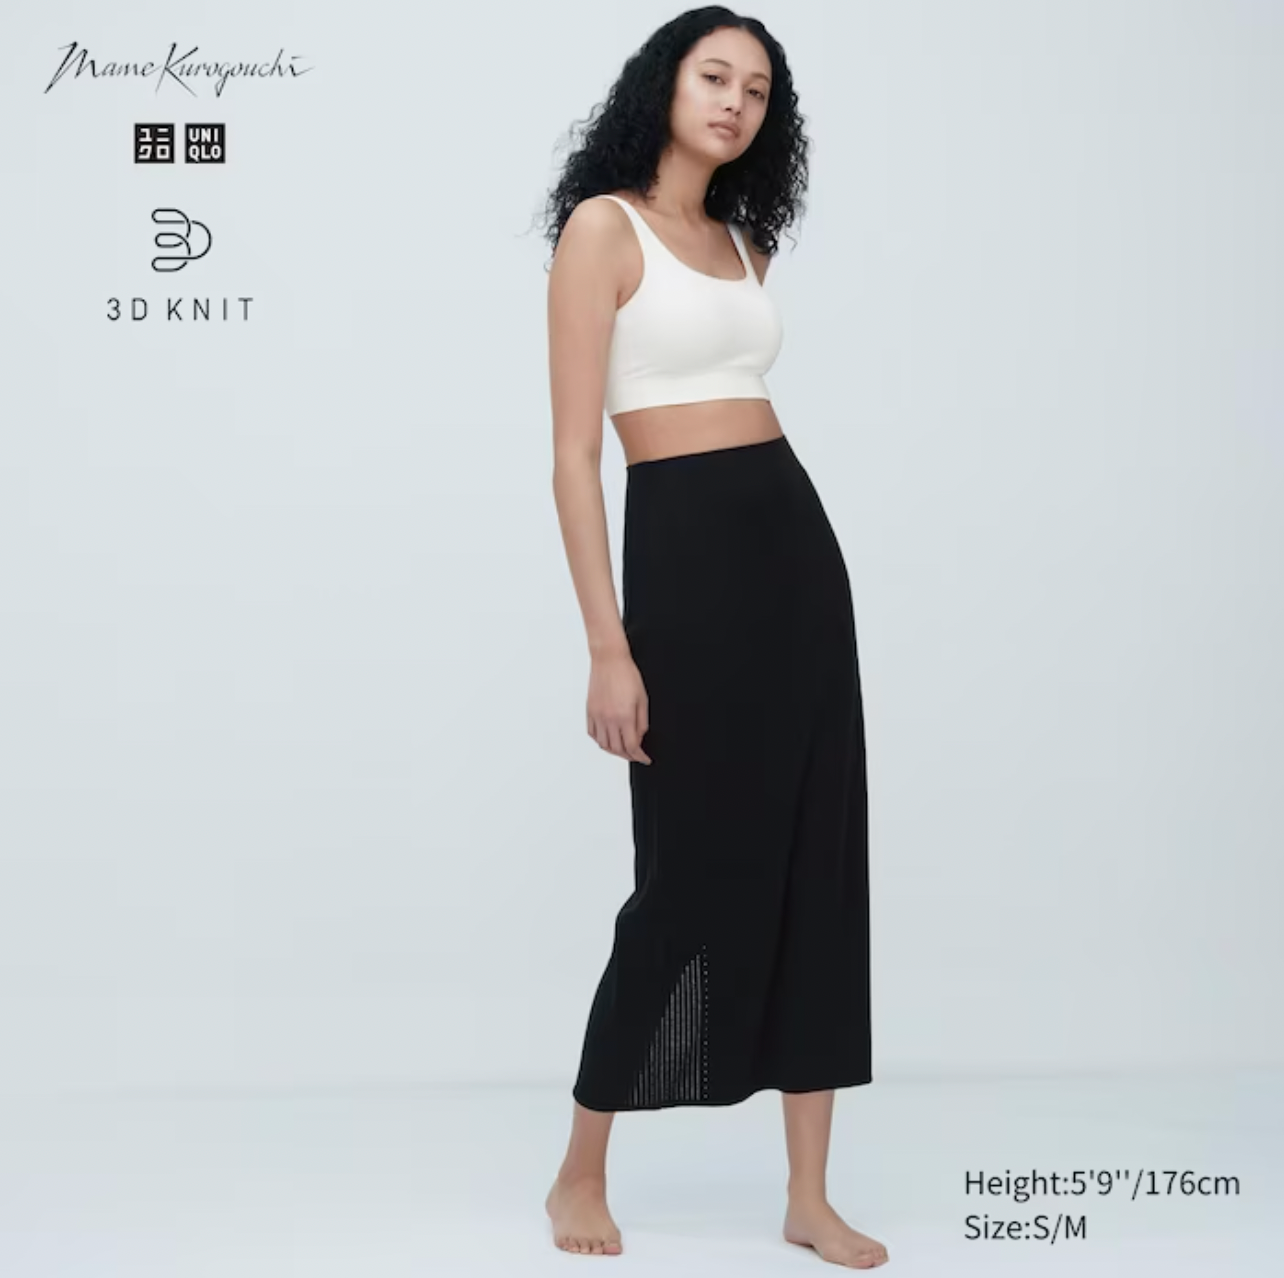 Second Uniqlo and Mame Kurogouchi collection out on Dec. 3 - Manila Standard